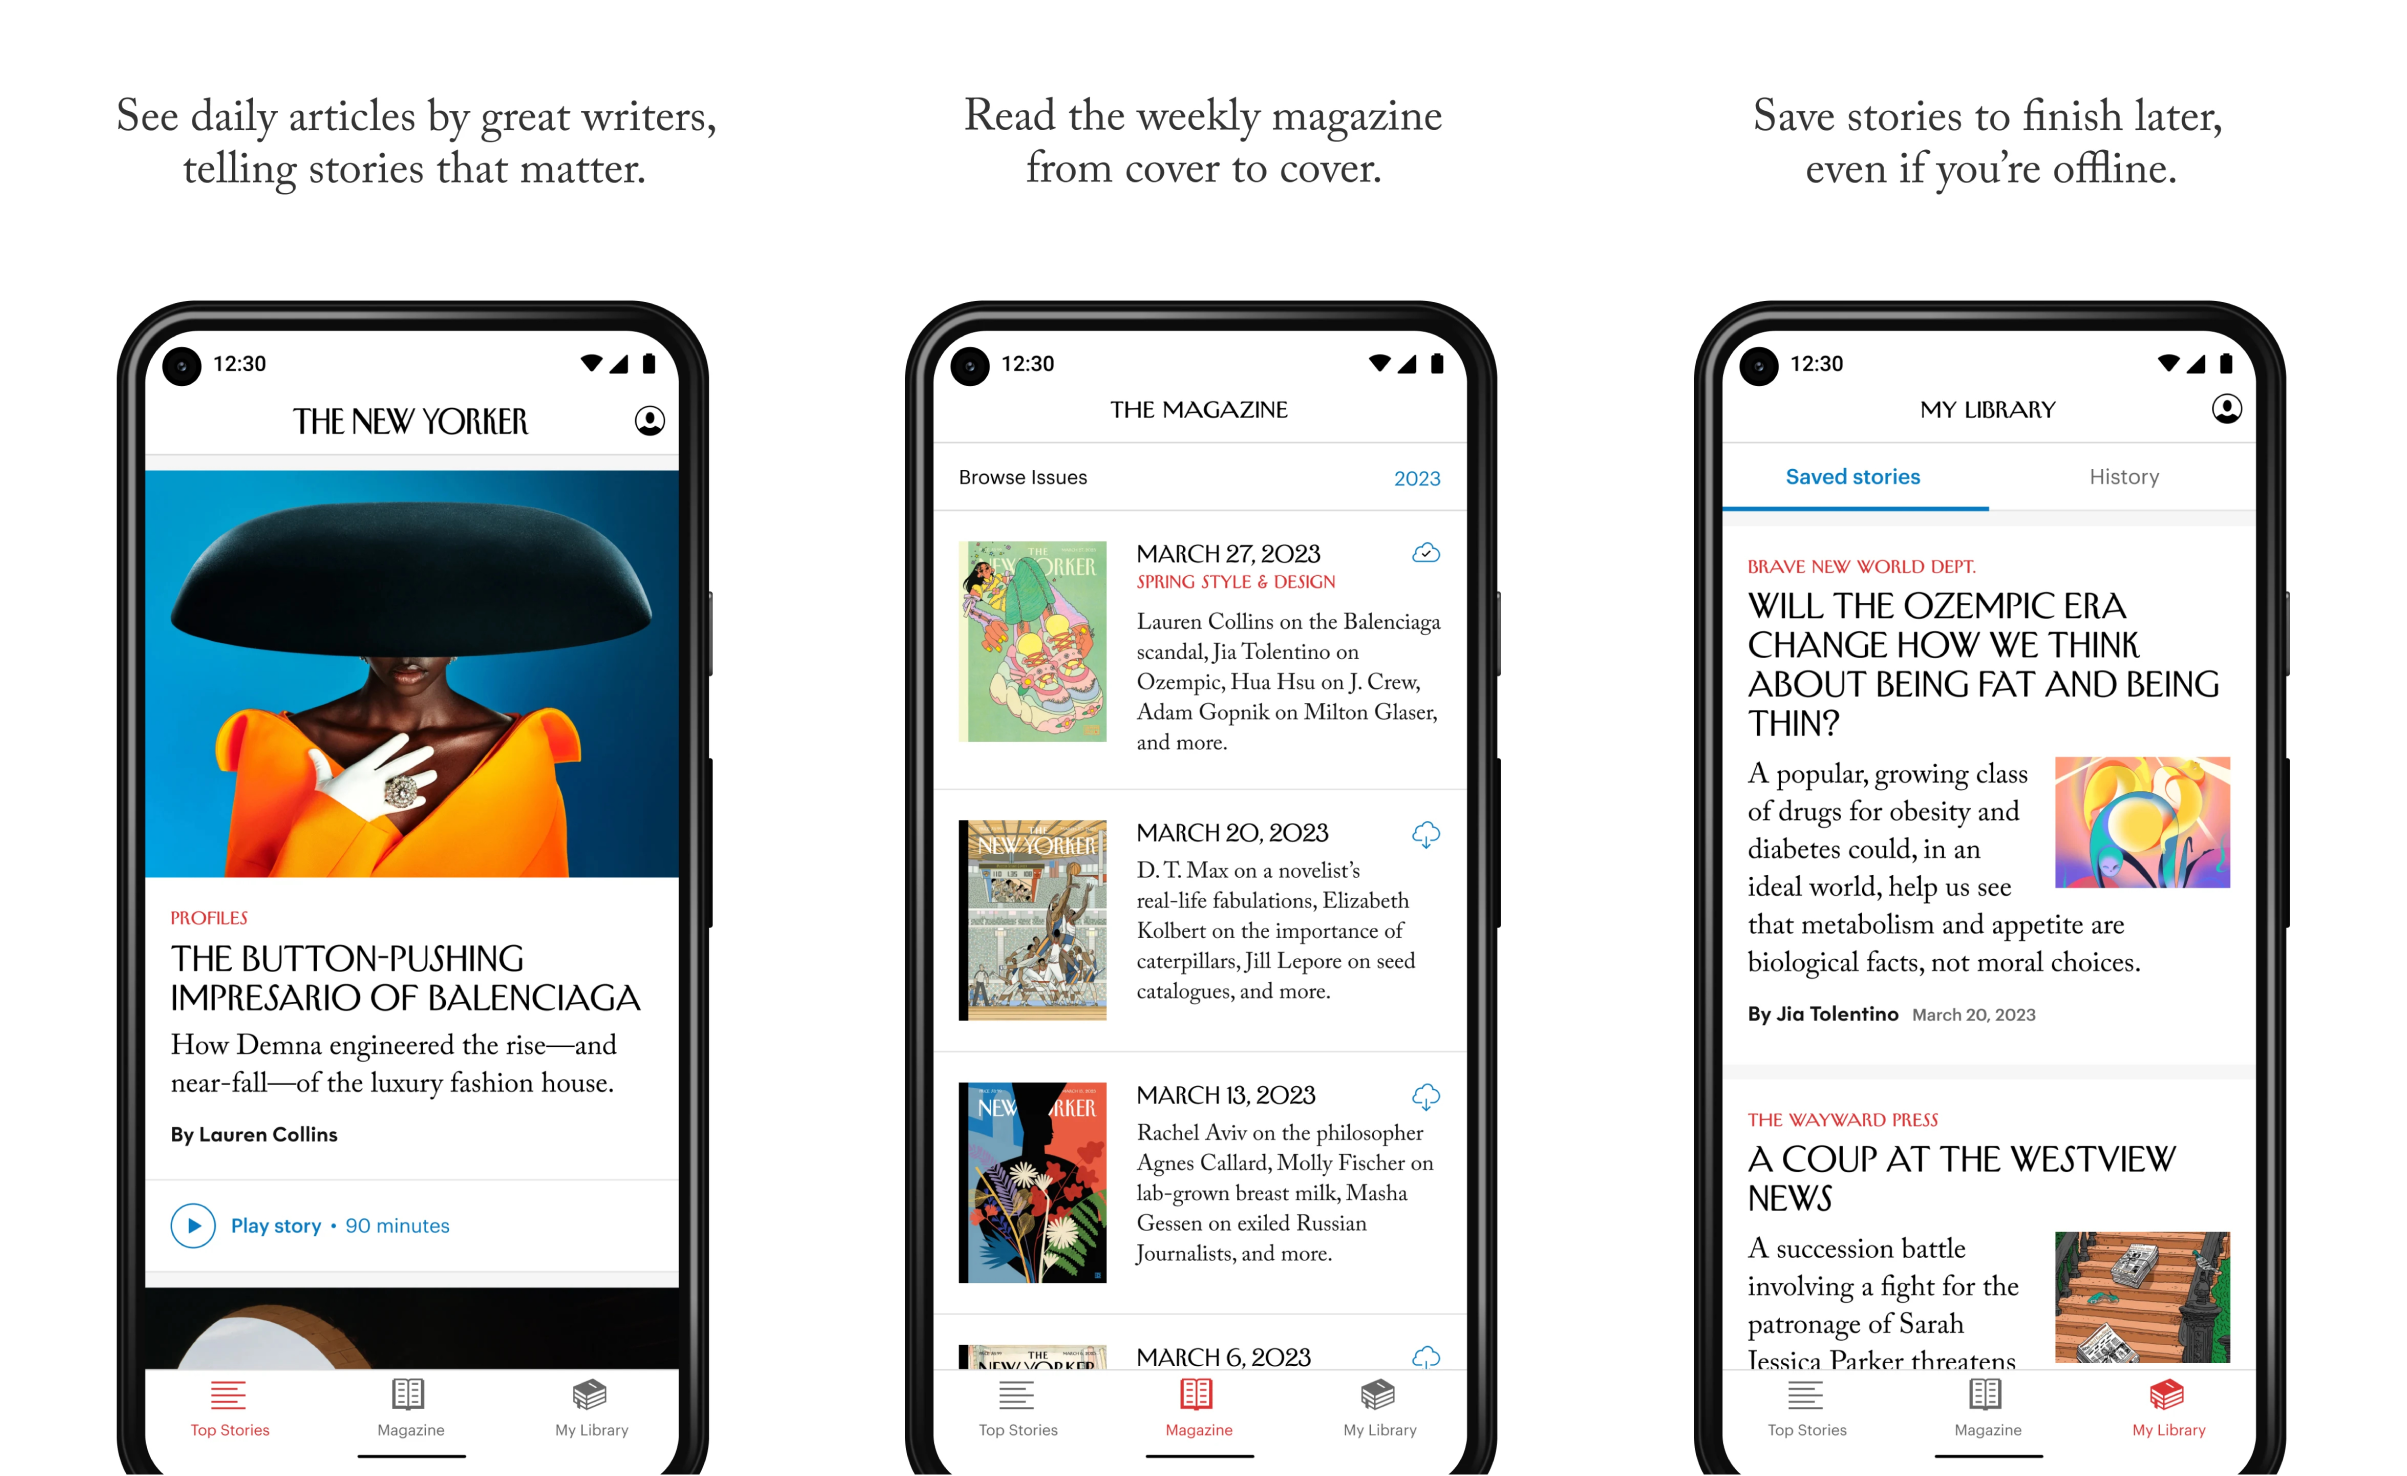 Screenshots of an app for reading articles from The New Yorker